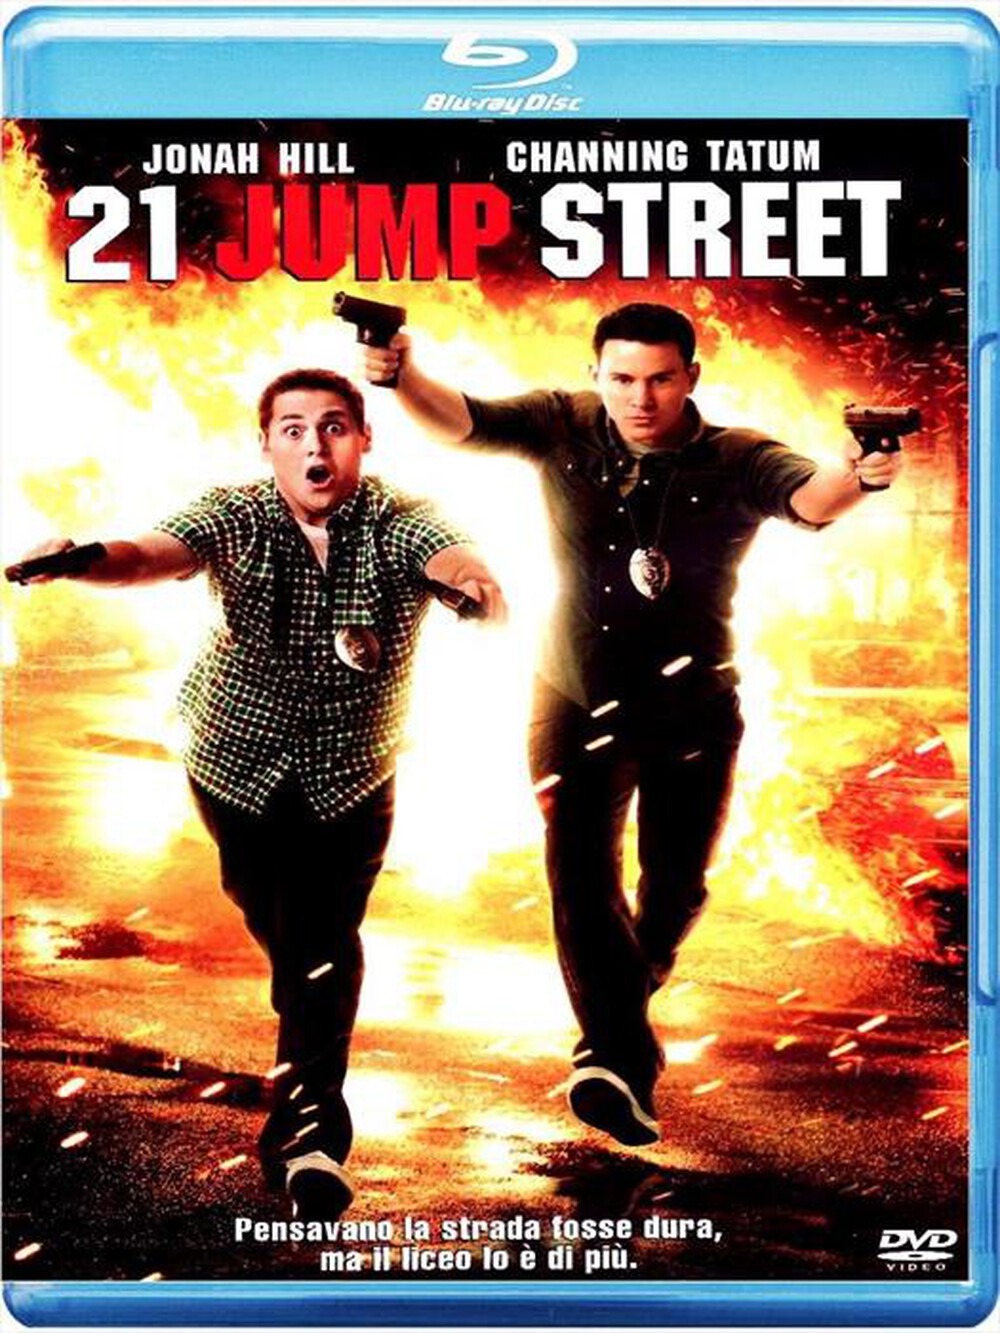 "EAGLE PICTURES - 21 Jump Street"